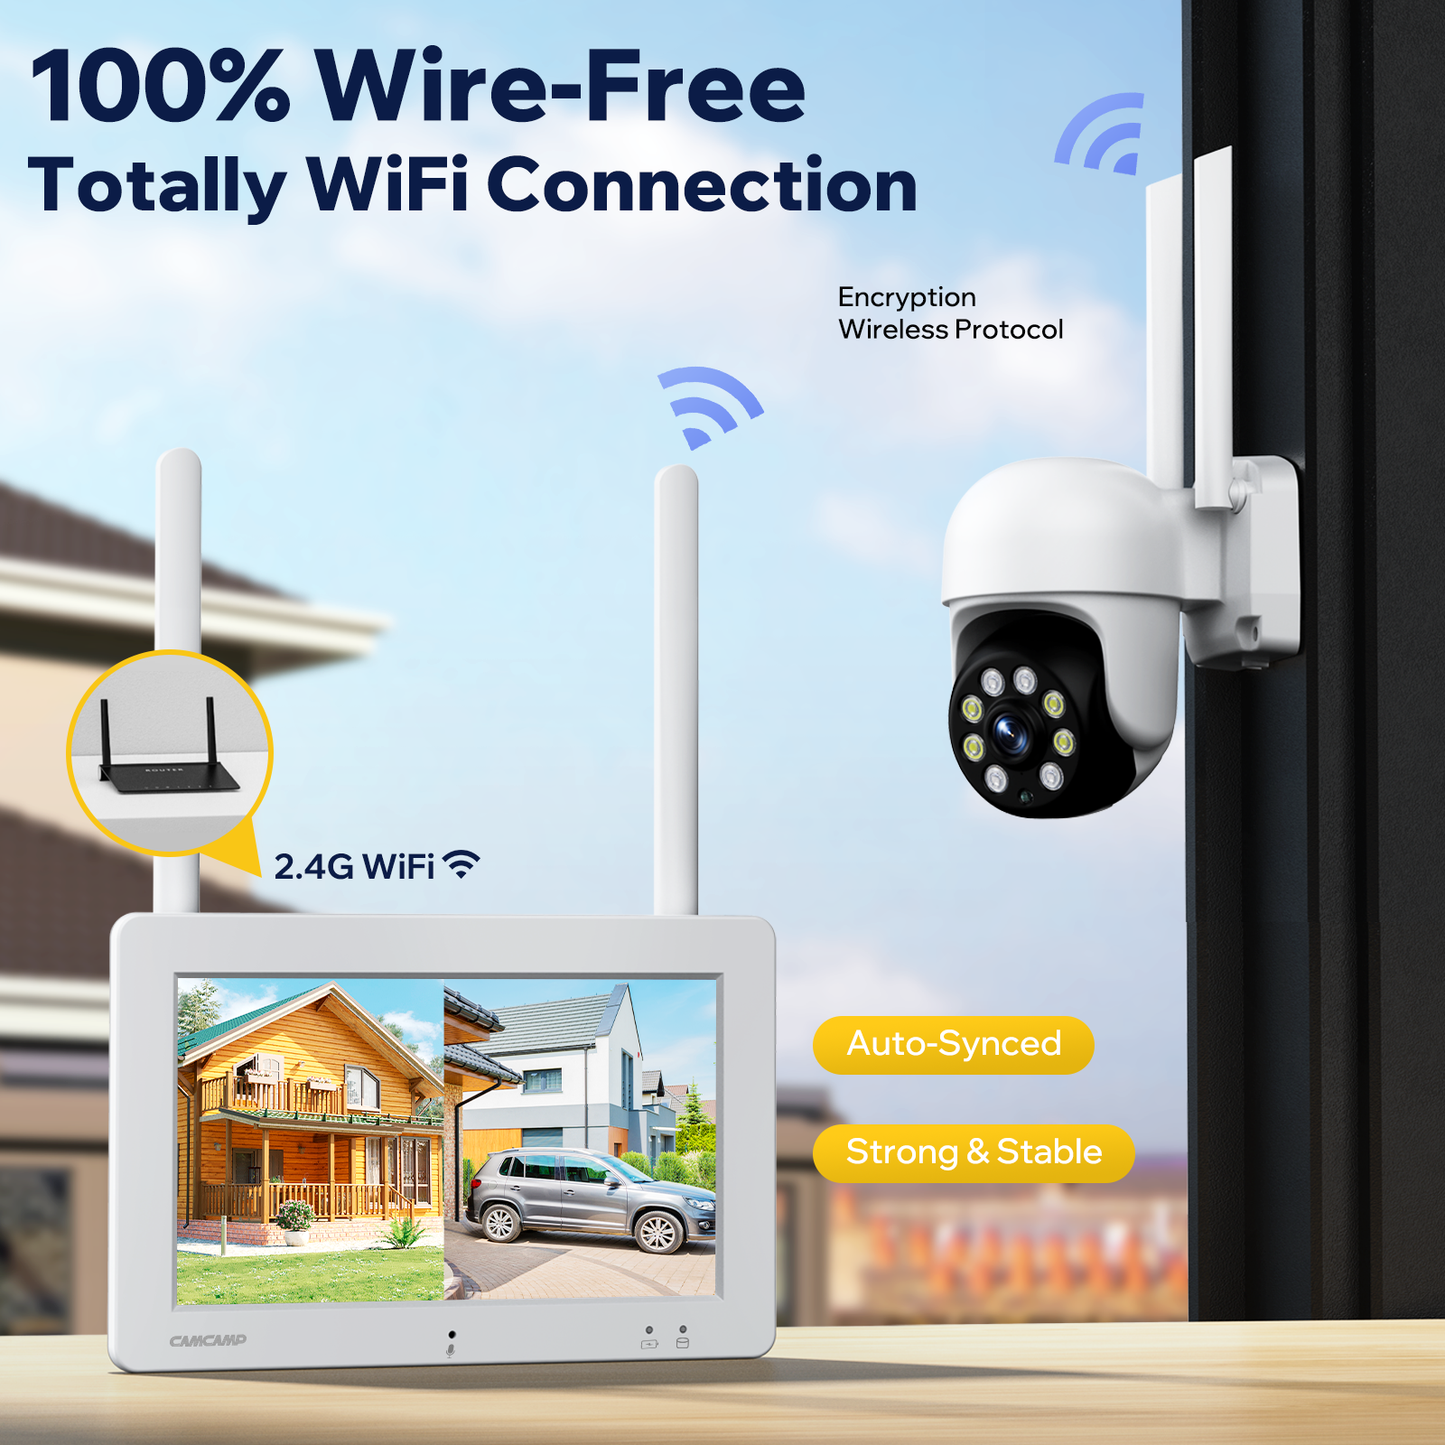 Toguard SC26 SC42 2K/3MP Wired/Solar Security Camera System Outdoor with 7" Monitor PTZ Dome Surveillance Camera WiFi Wireless Connector